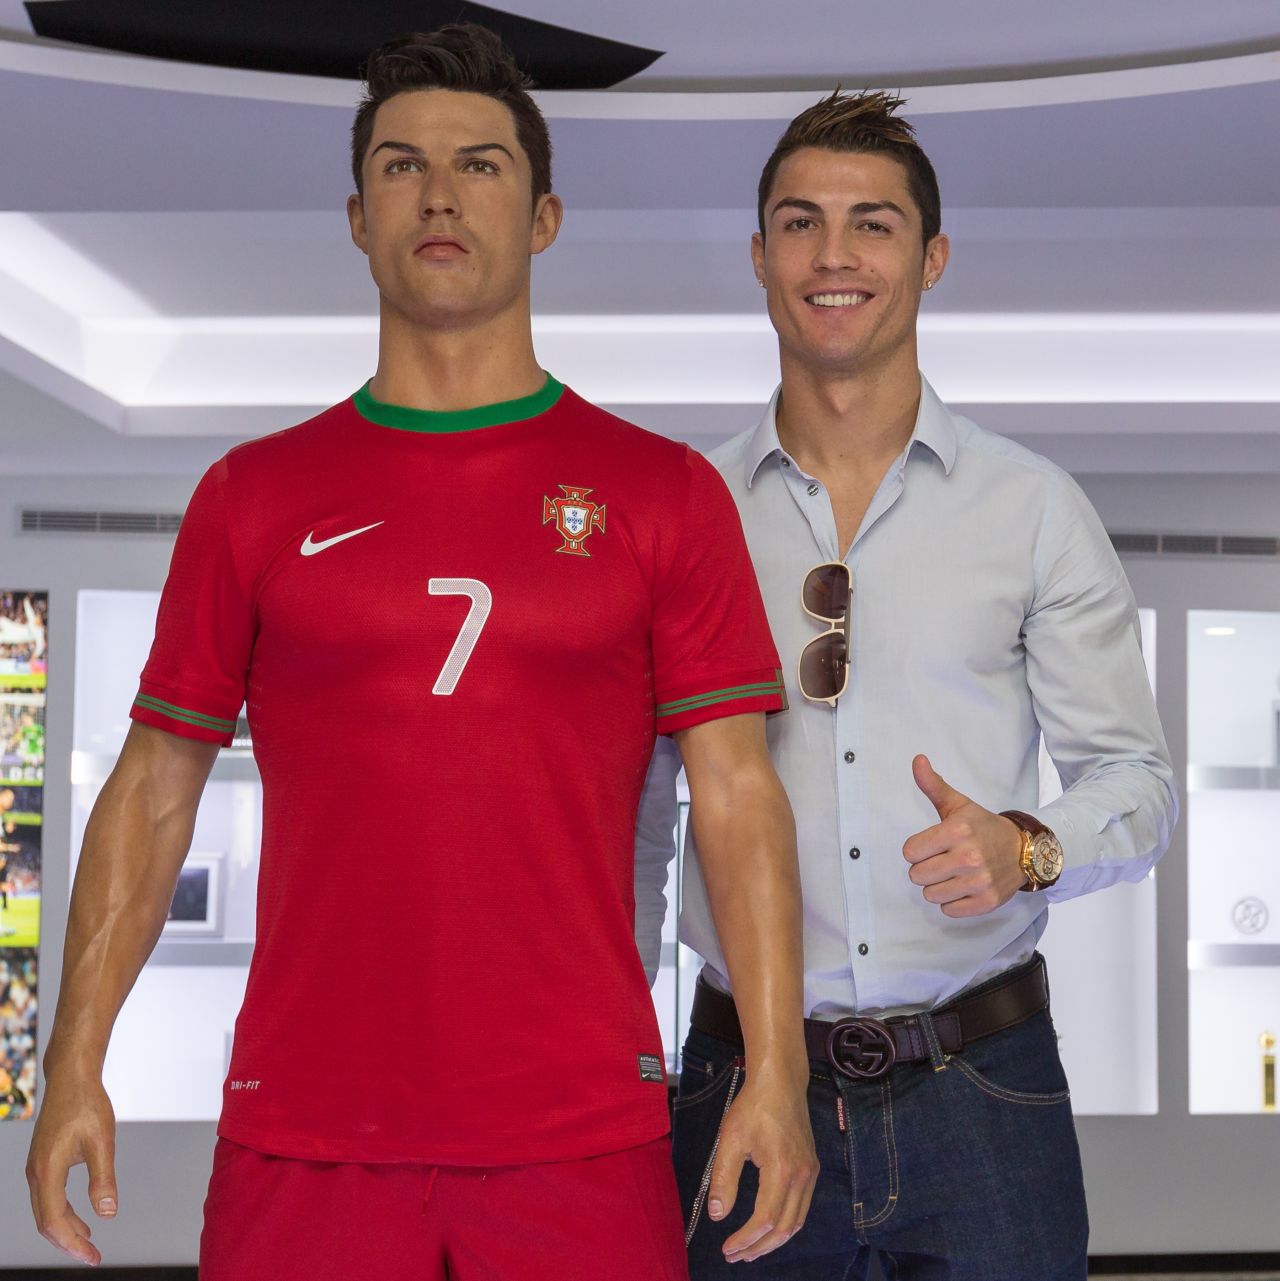 Cristiano Ronaldo stands next to a wax figure of himself at the opening of a museum dedicated to his football career in his Portuguese hometown.